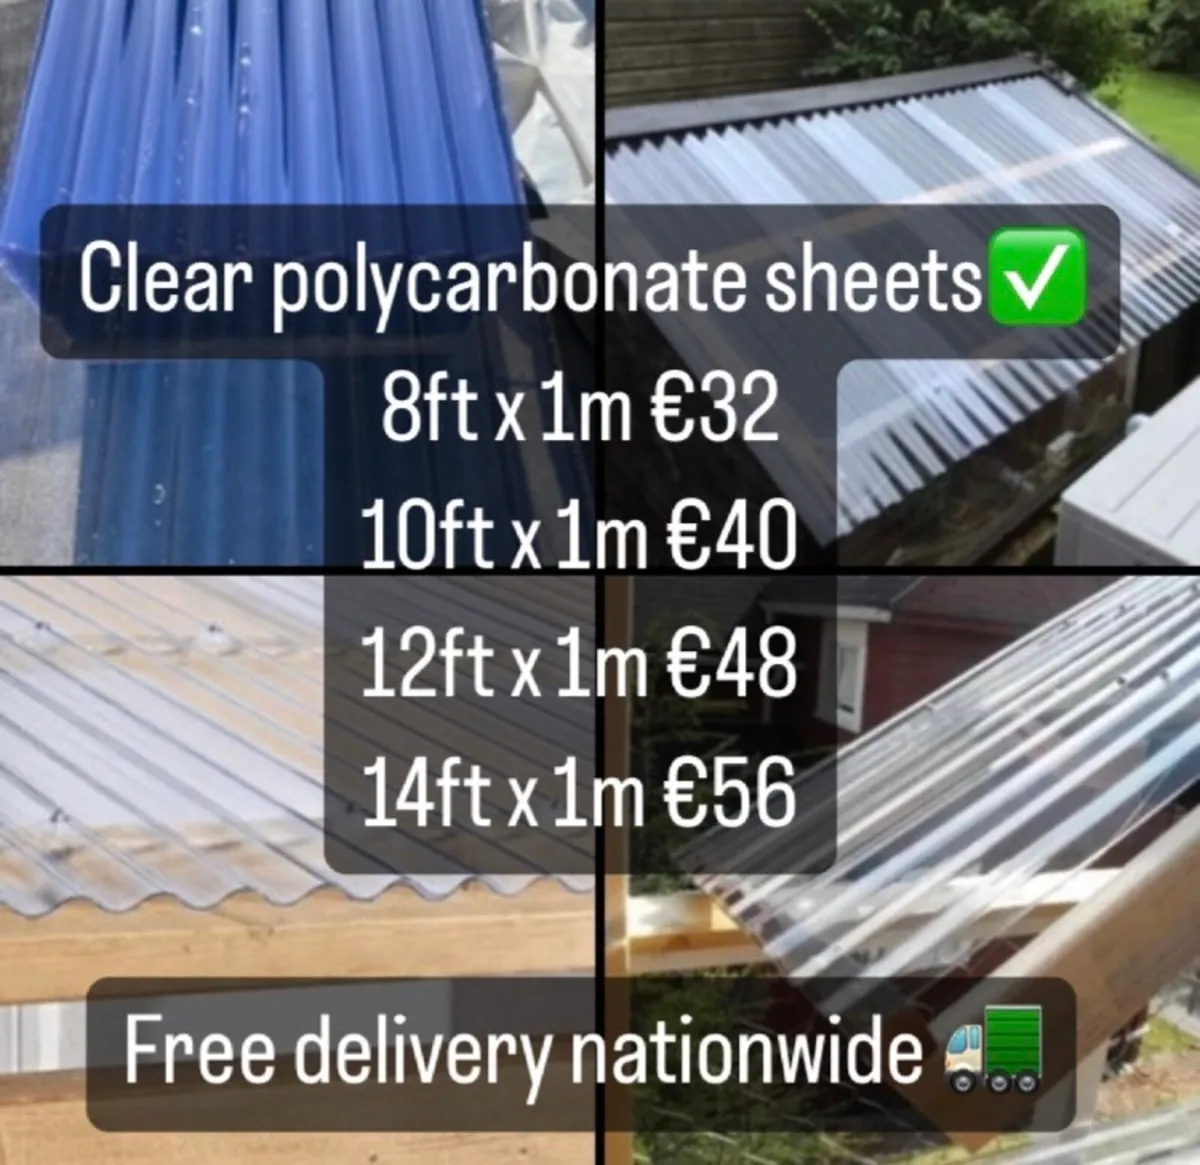 Clear polycarbonate skylights✅€4 per foot